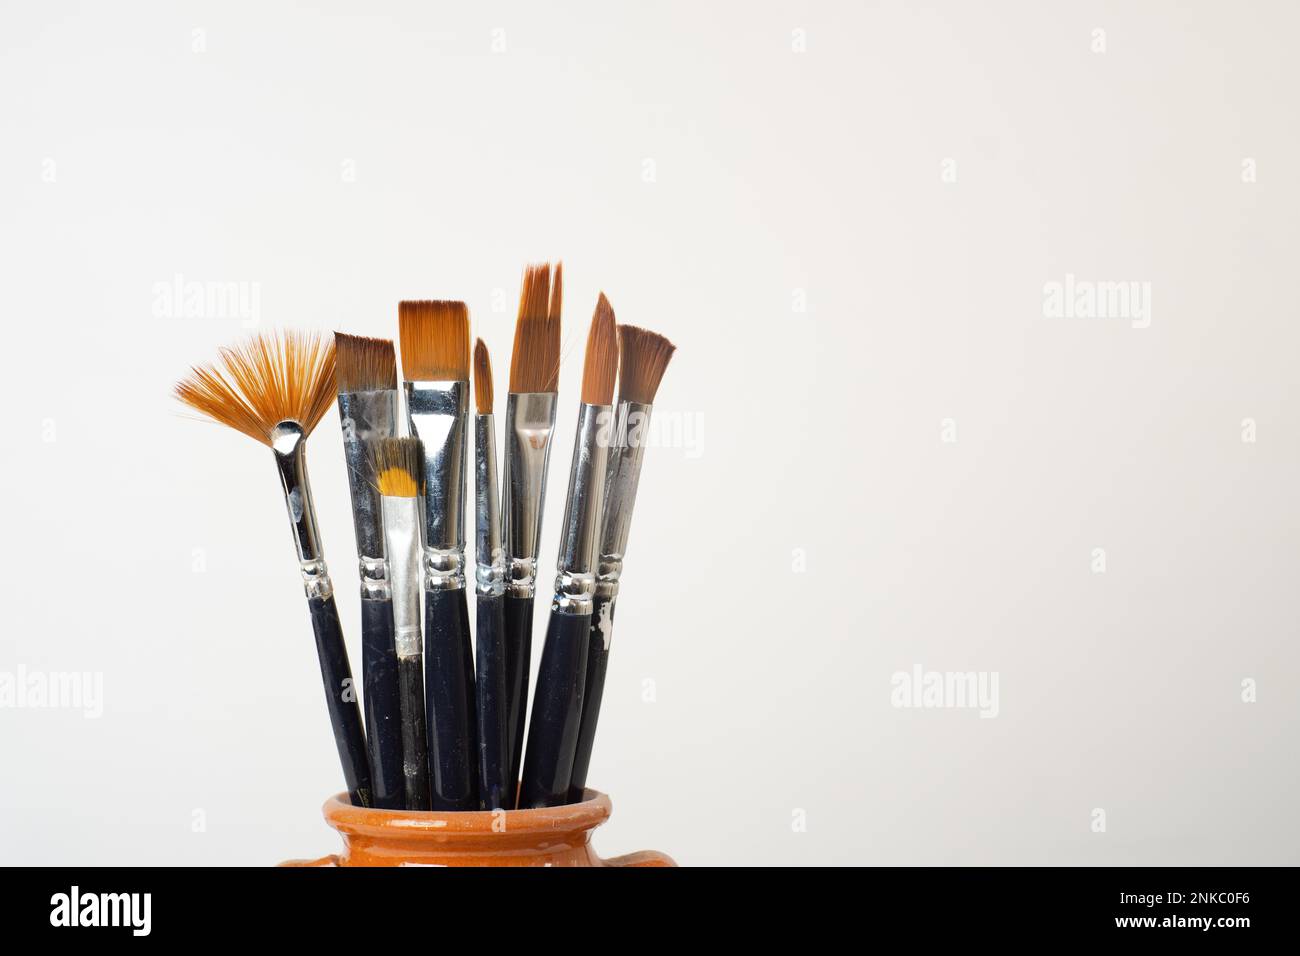 Earthenware jar with brushes isolated on a white background Stock Photo